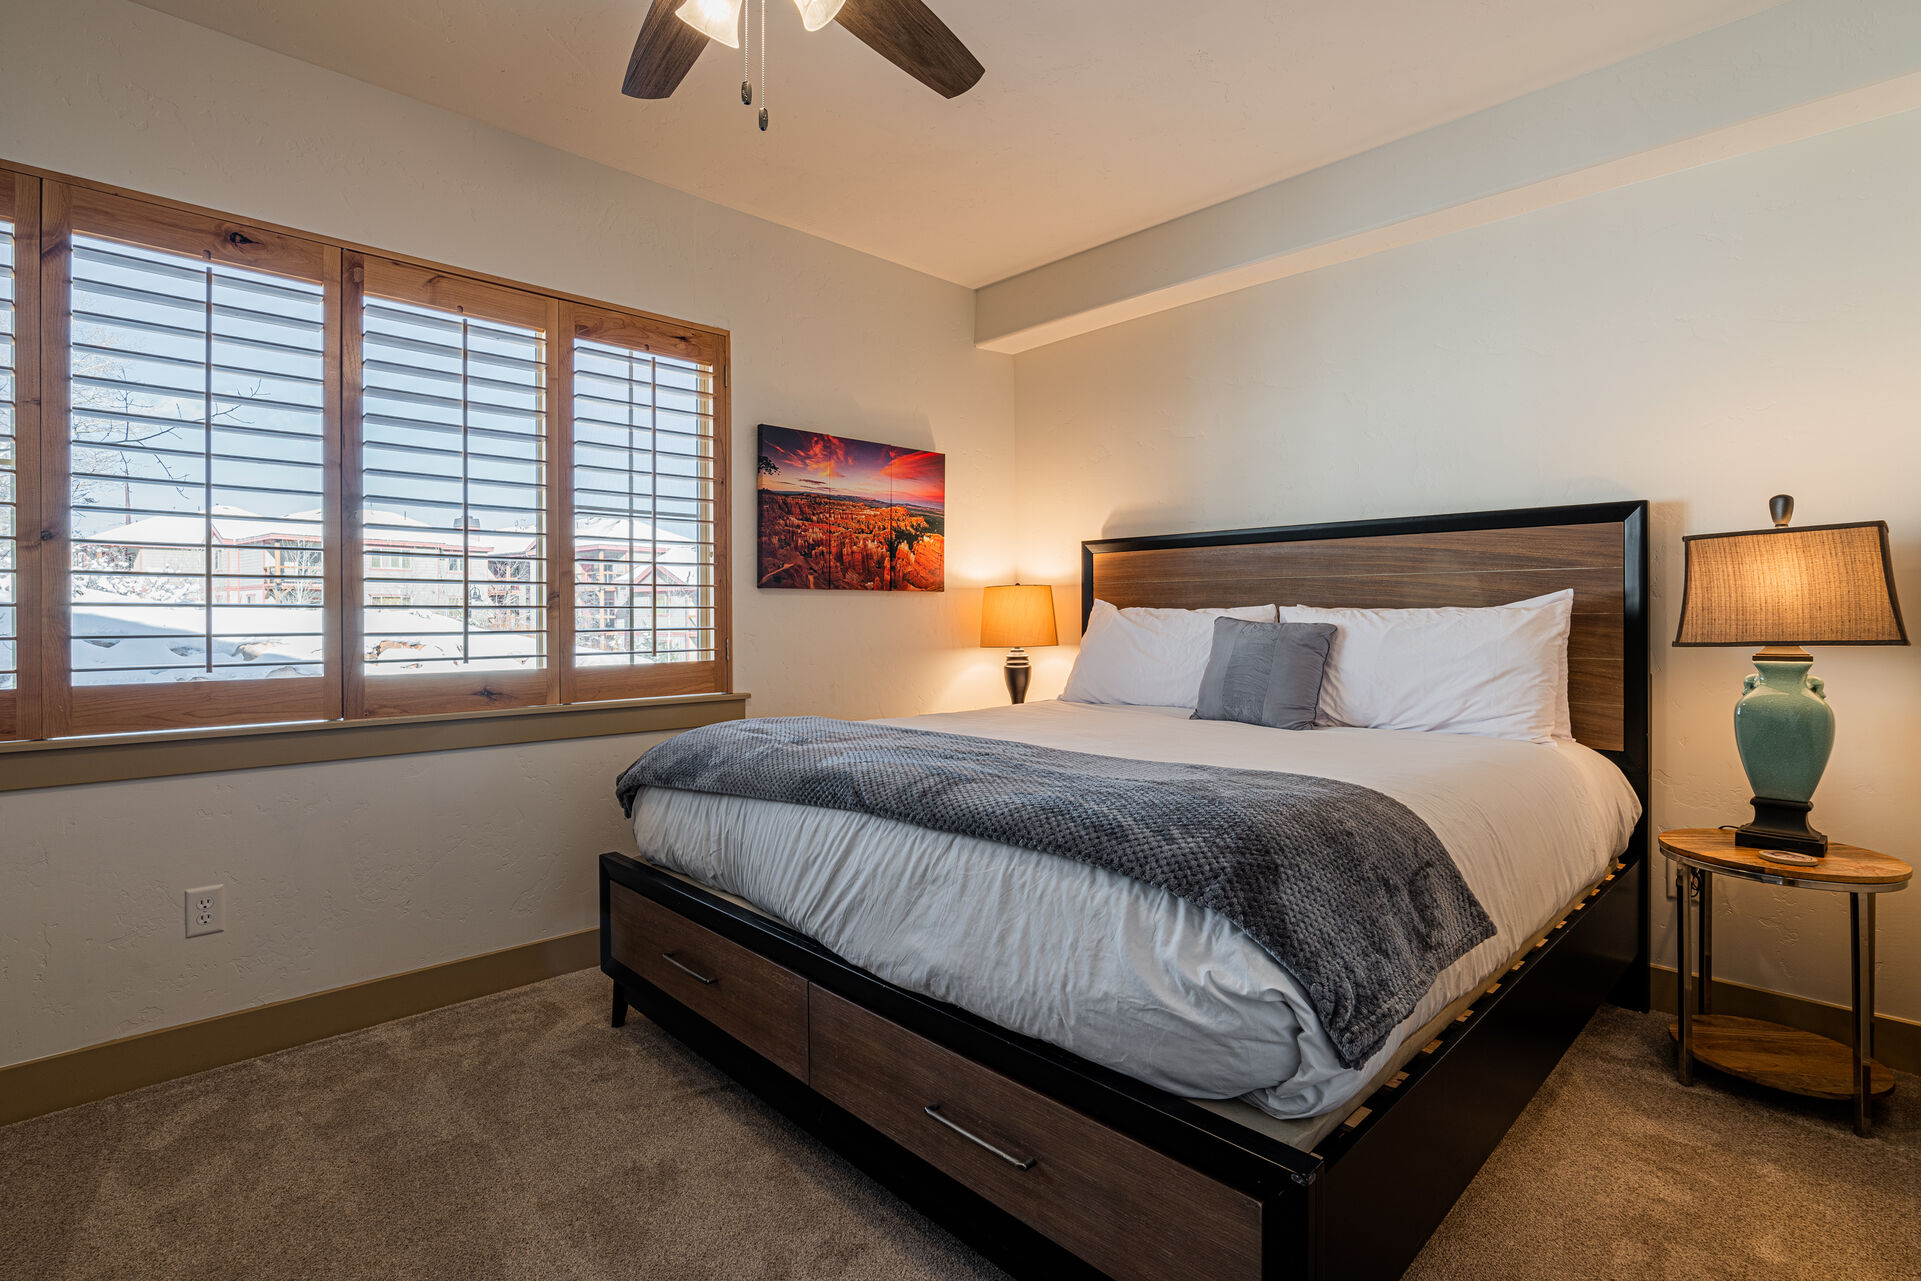 Master Bedroom with King size bed, TV, and private bathroom